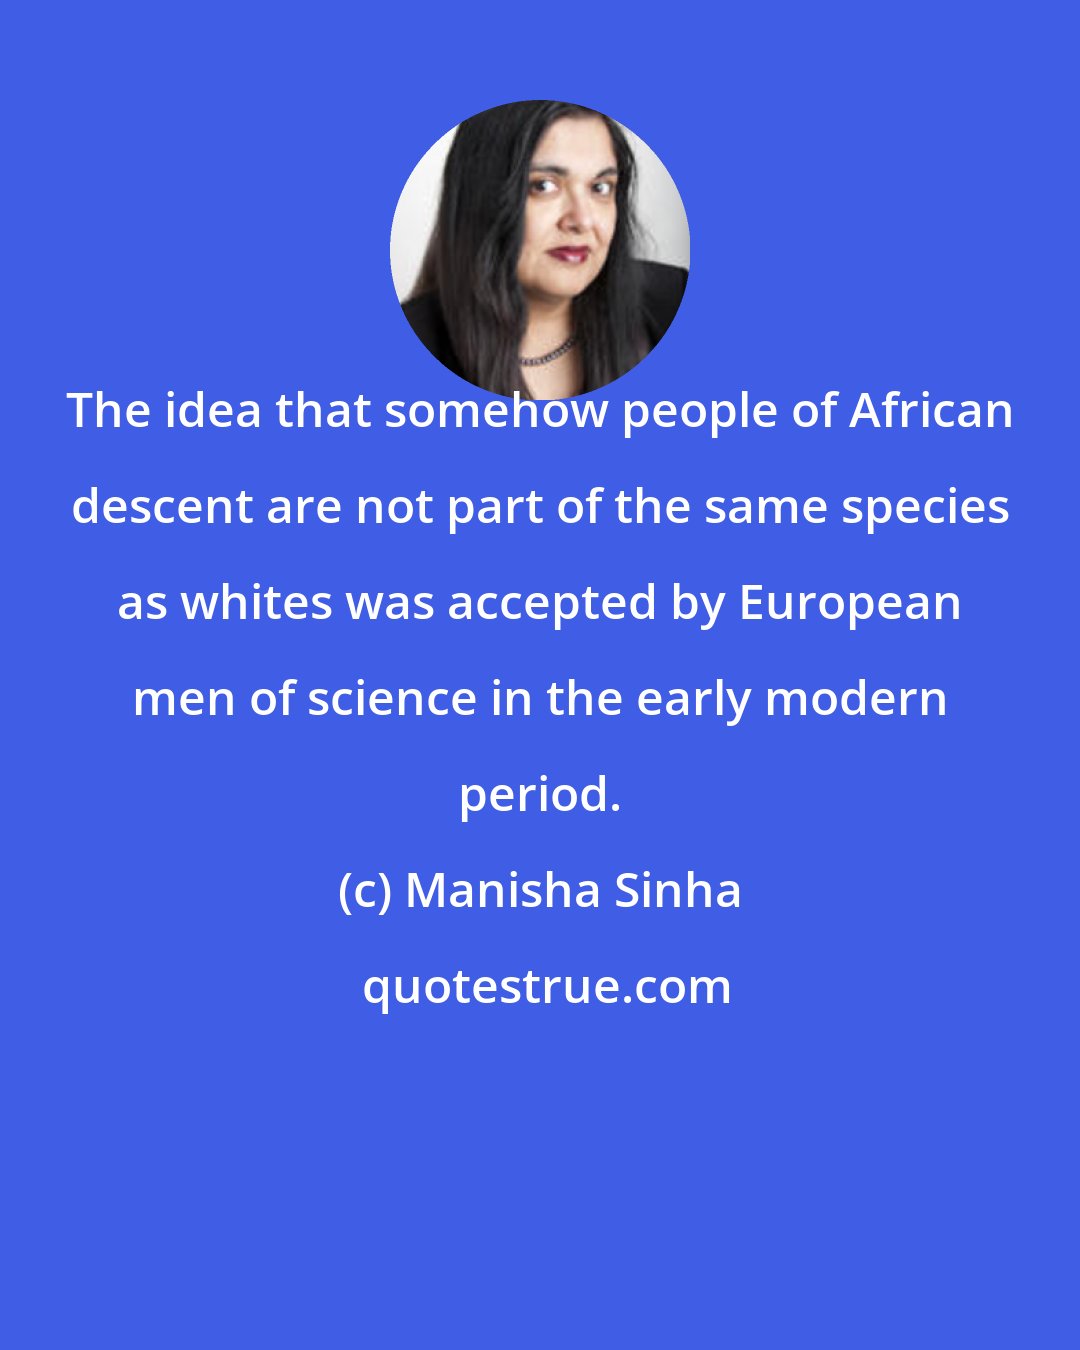 Manisha Sinha: The idea that somehow people of African descent are not part of the same species as whites was accepted by European men of science in the early modern period.